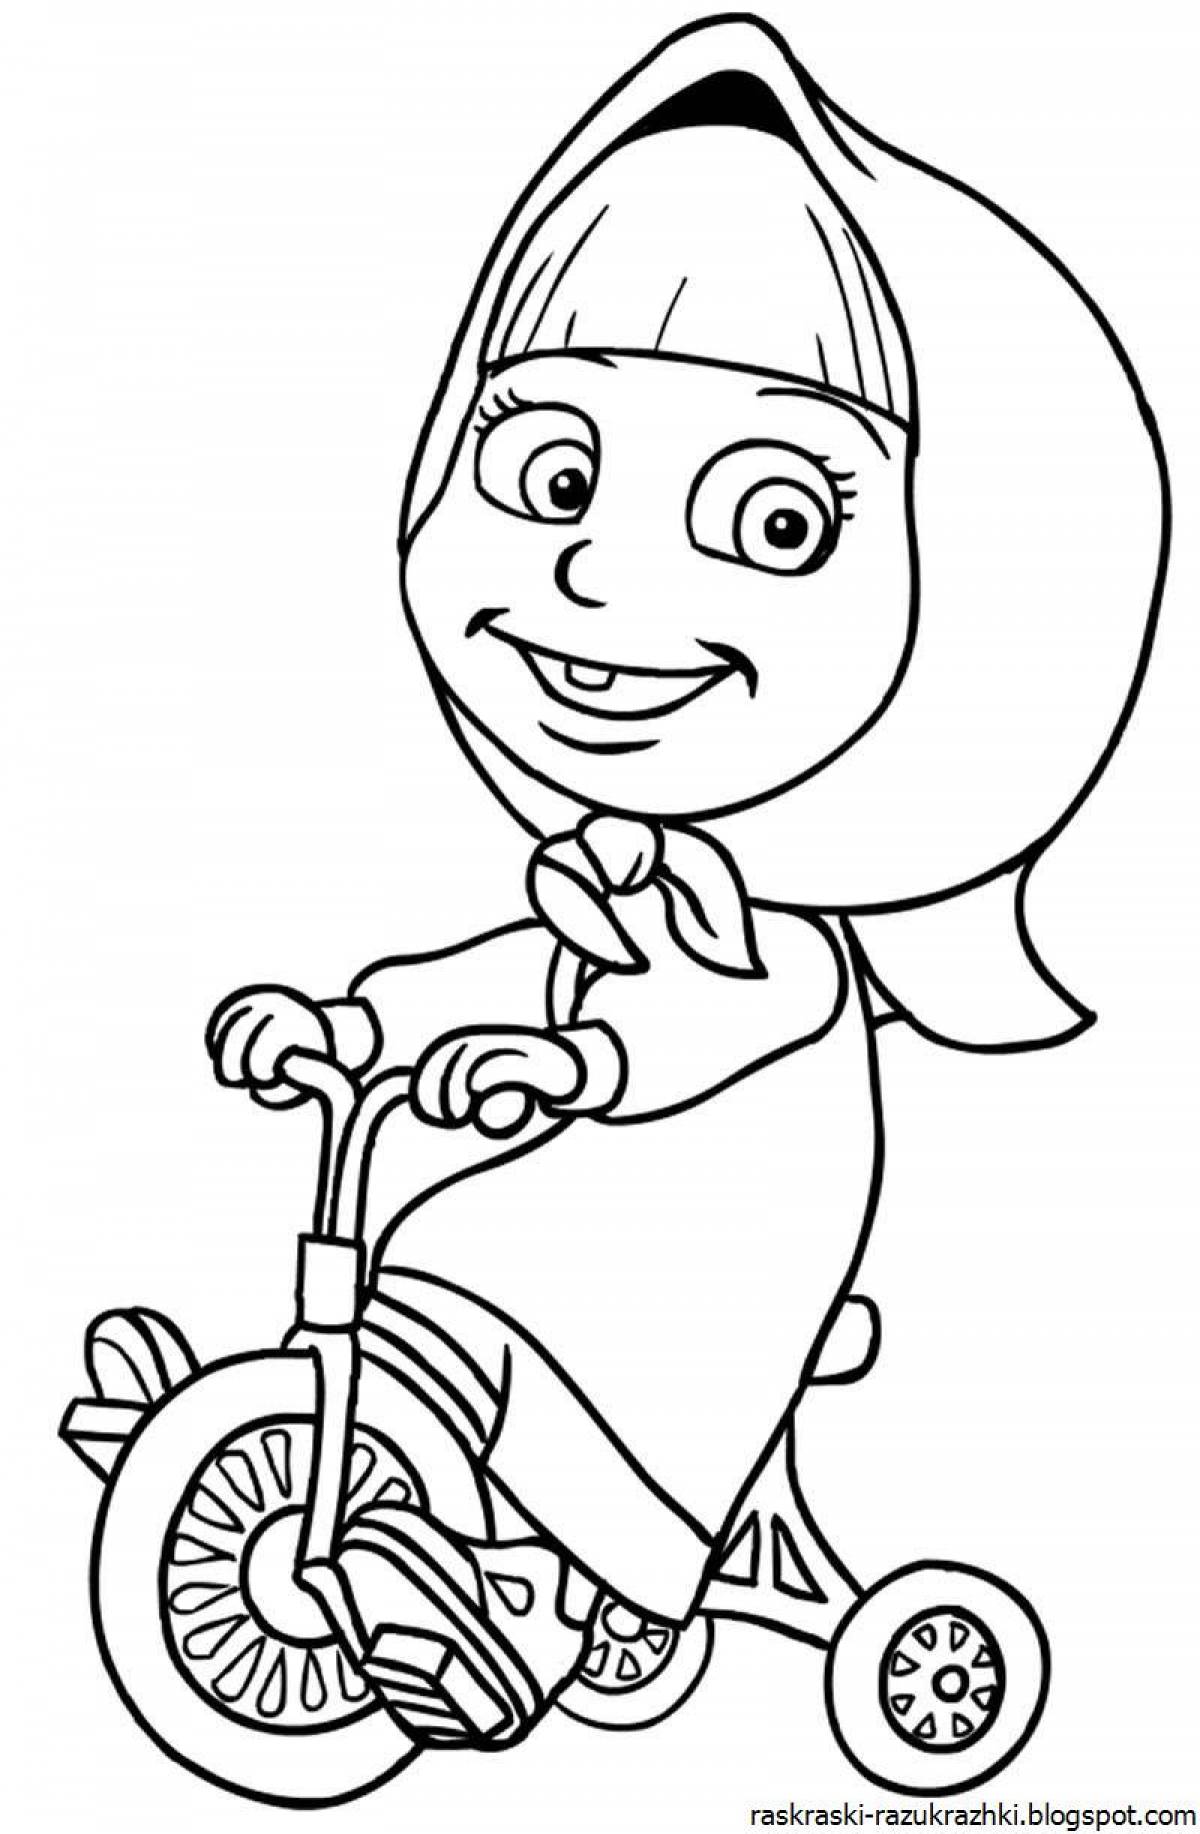 Cute masha and the bear coloring pages for kids